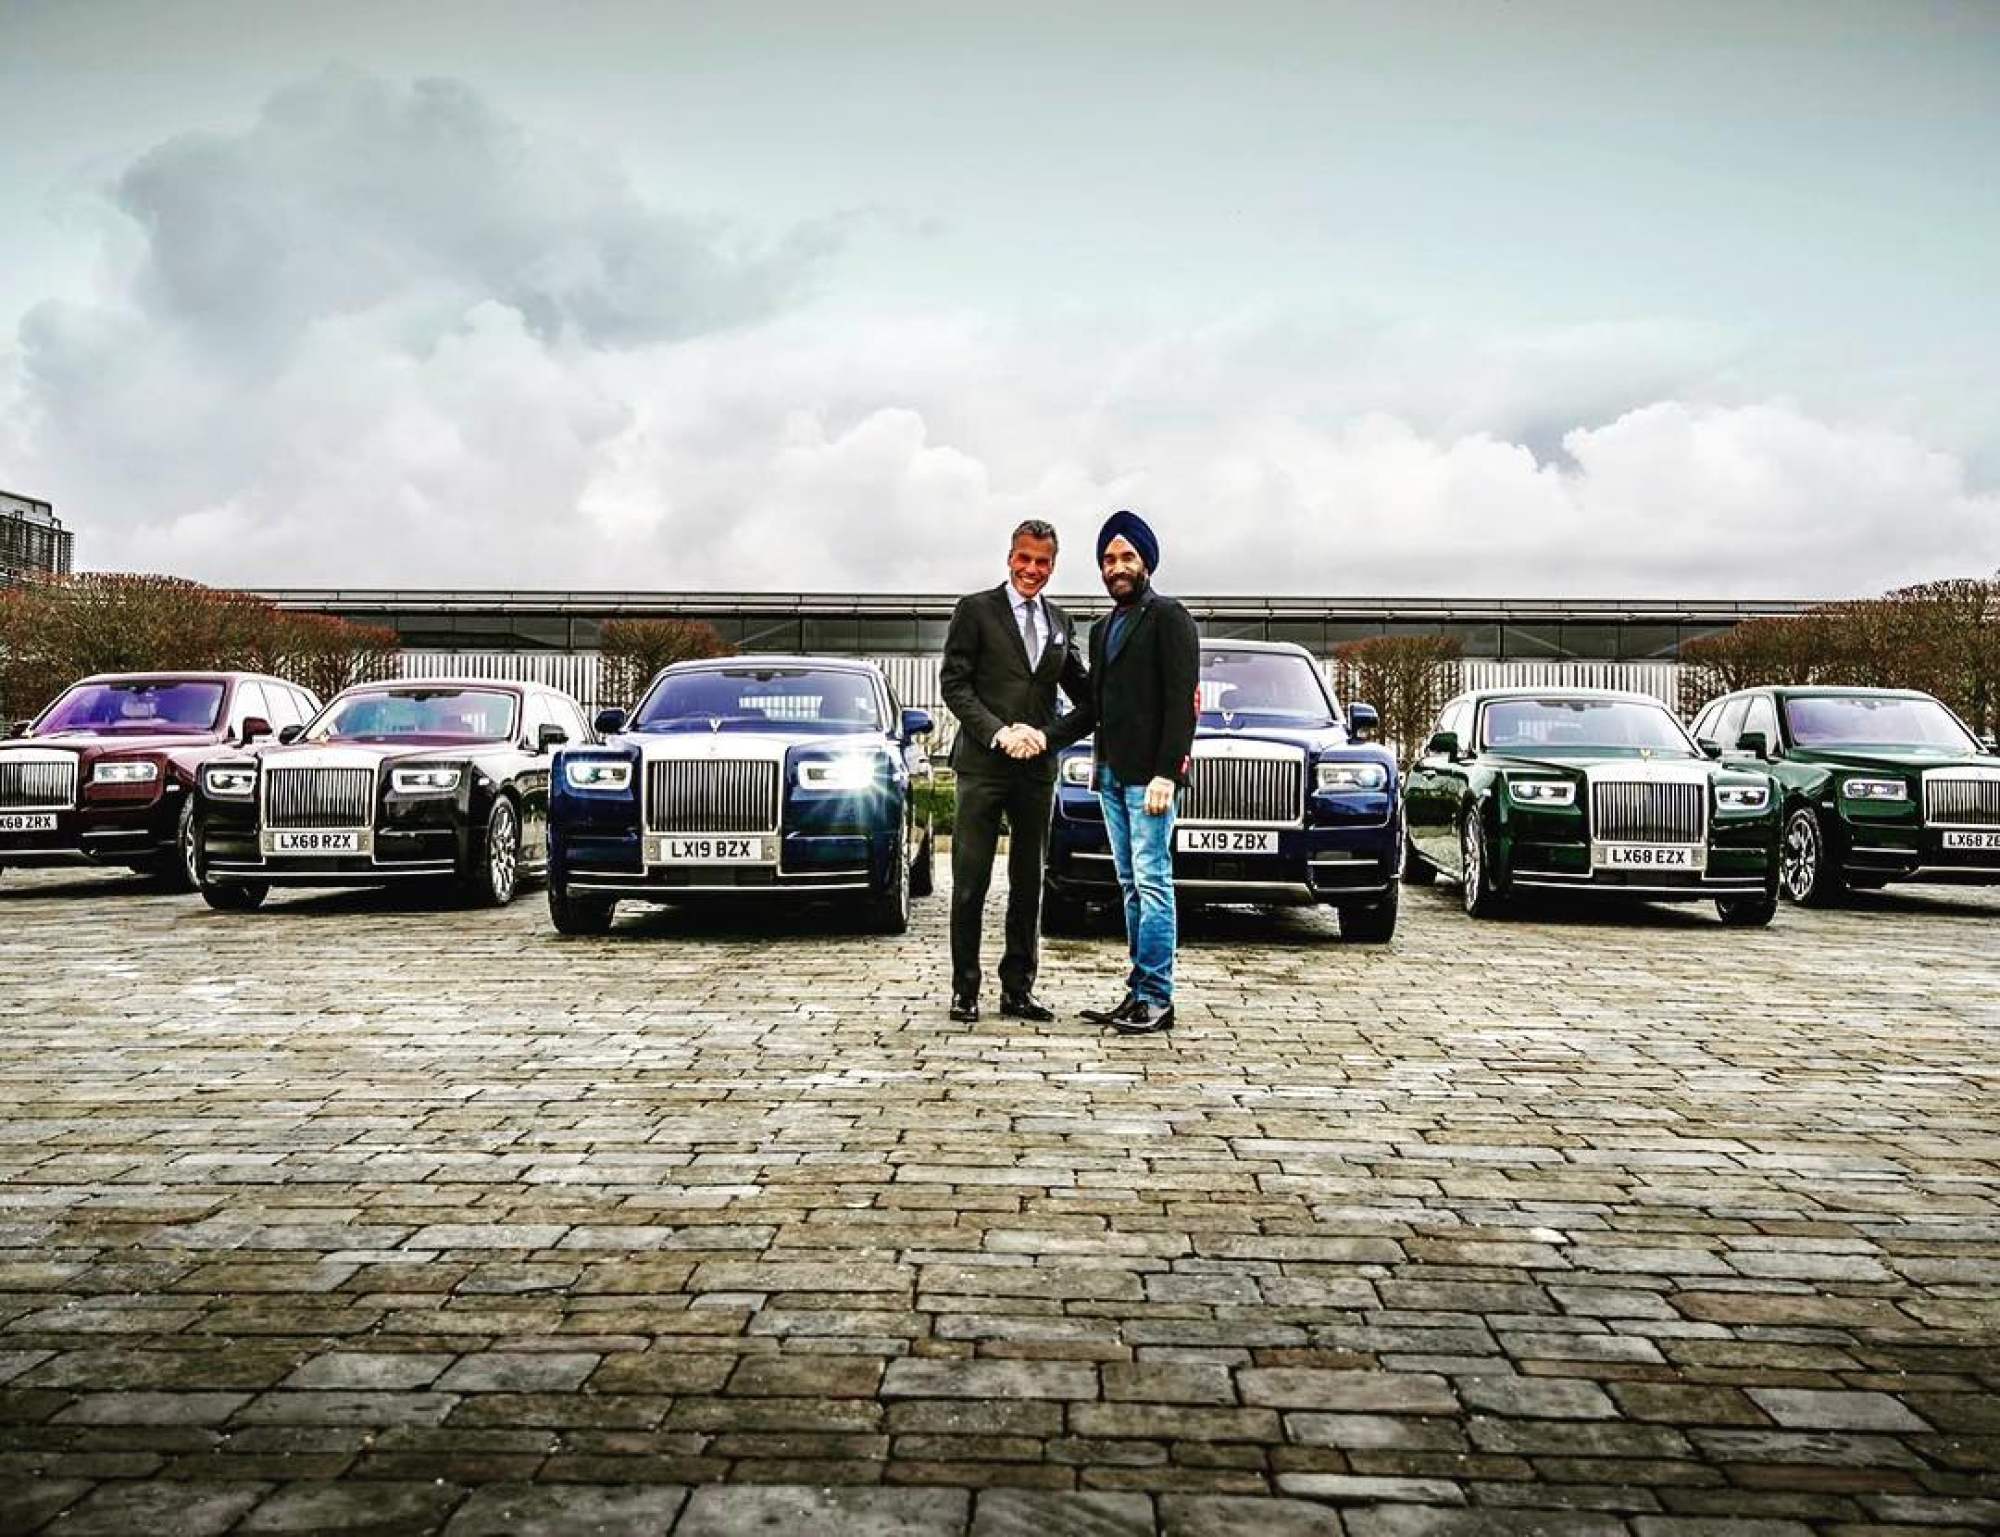 Meet 'British Bill Gates' Reuben Singh, the flashy Indian millionaire who  matches his turbans to his Rolls-Royce luxury car collection – but did he  really buy 5 more just for Diwali?